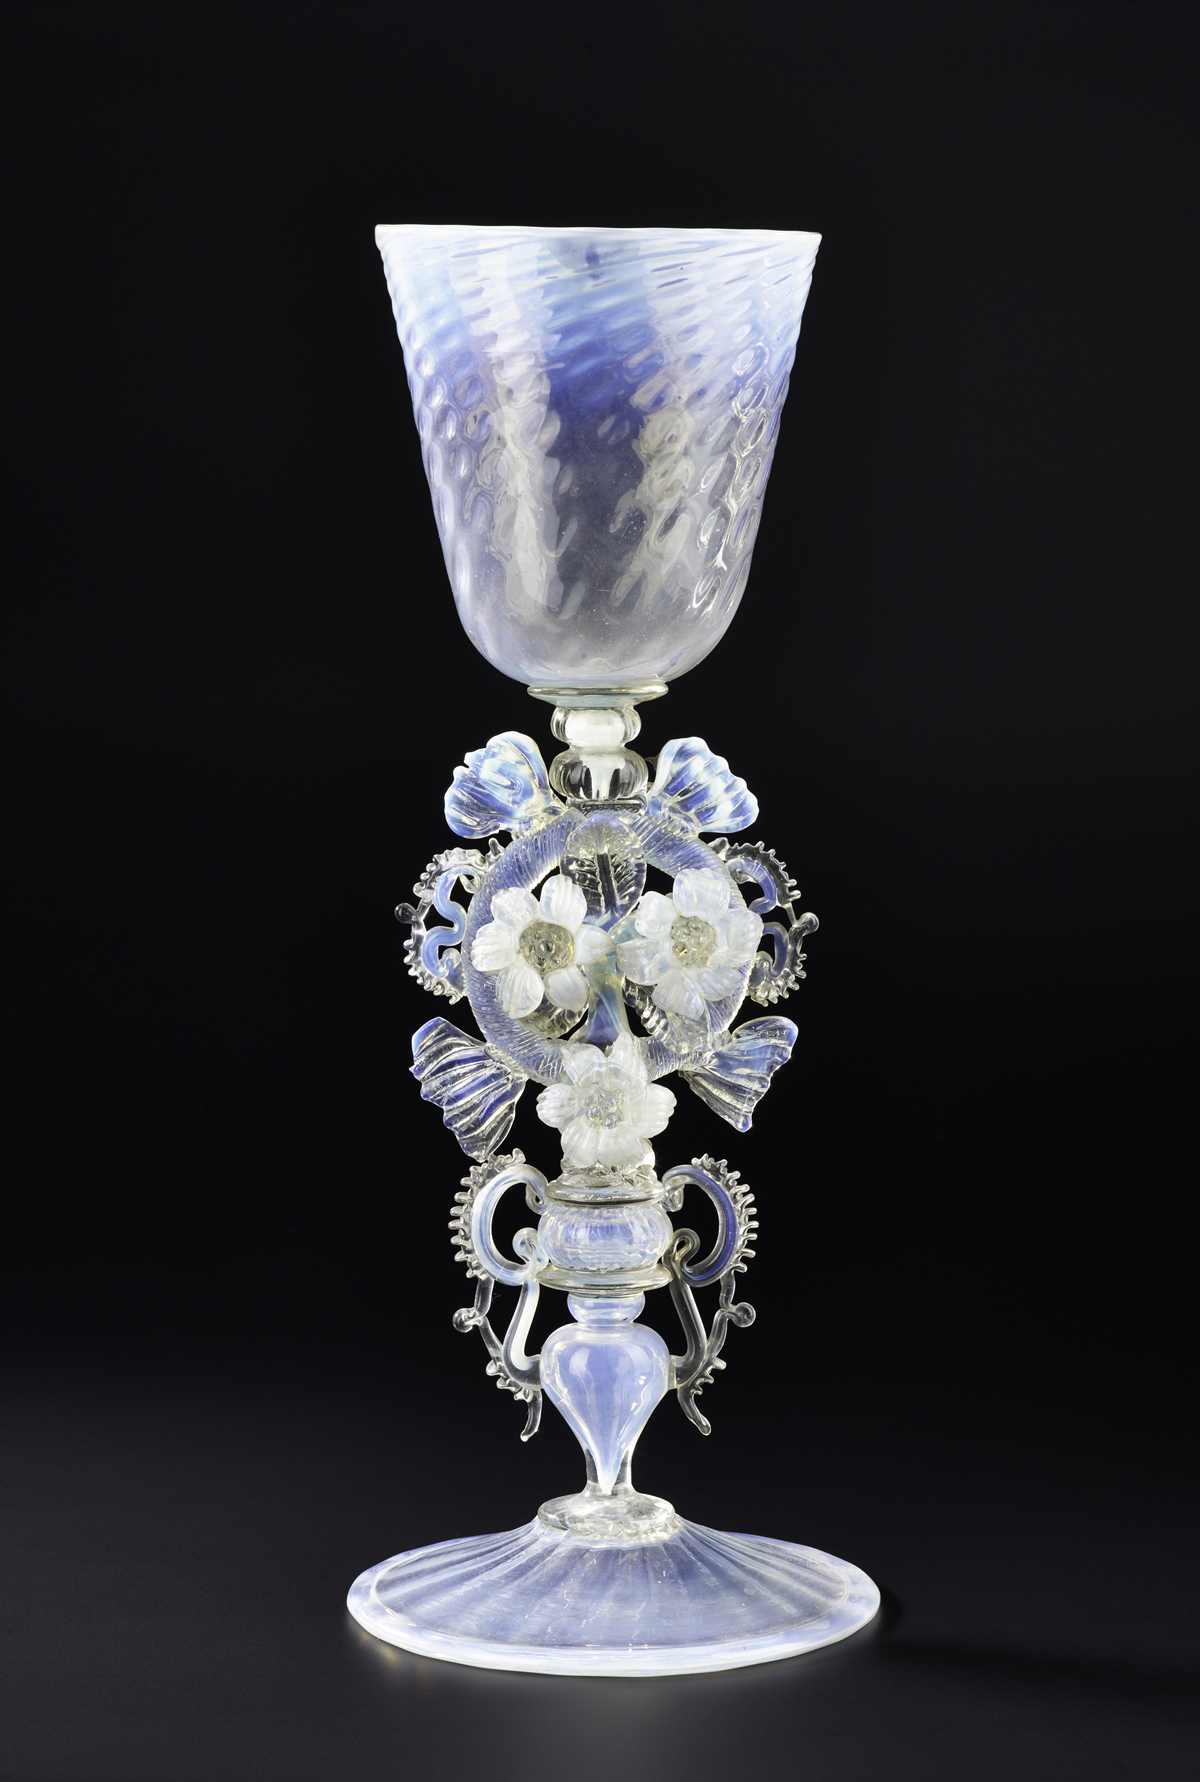 A.1873.27.2 - Tall goblet of opal glass with winged stem, flowers in relief and spirally ribbed bowl: Italian, Venetian, 19th century.